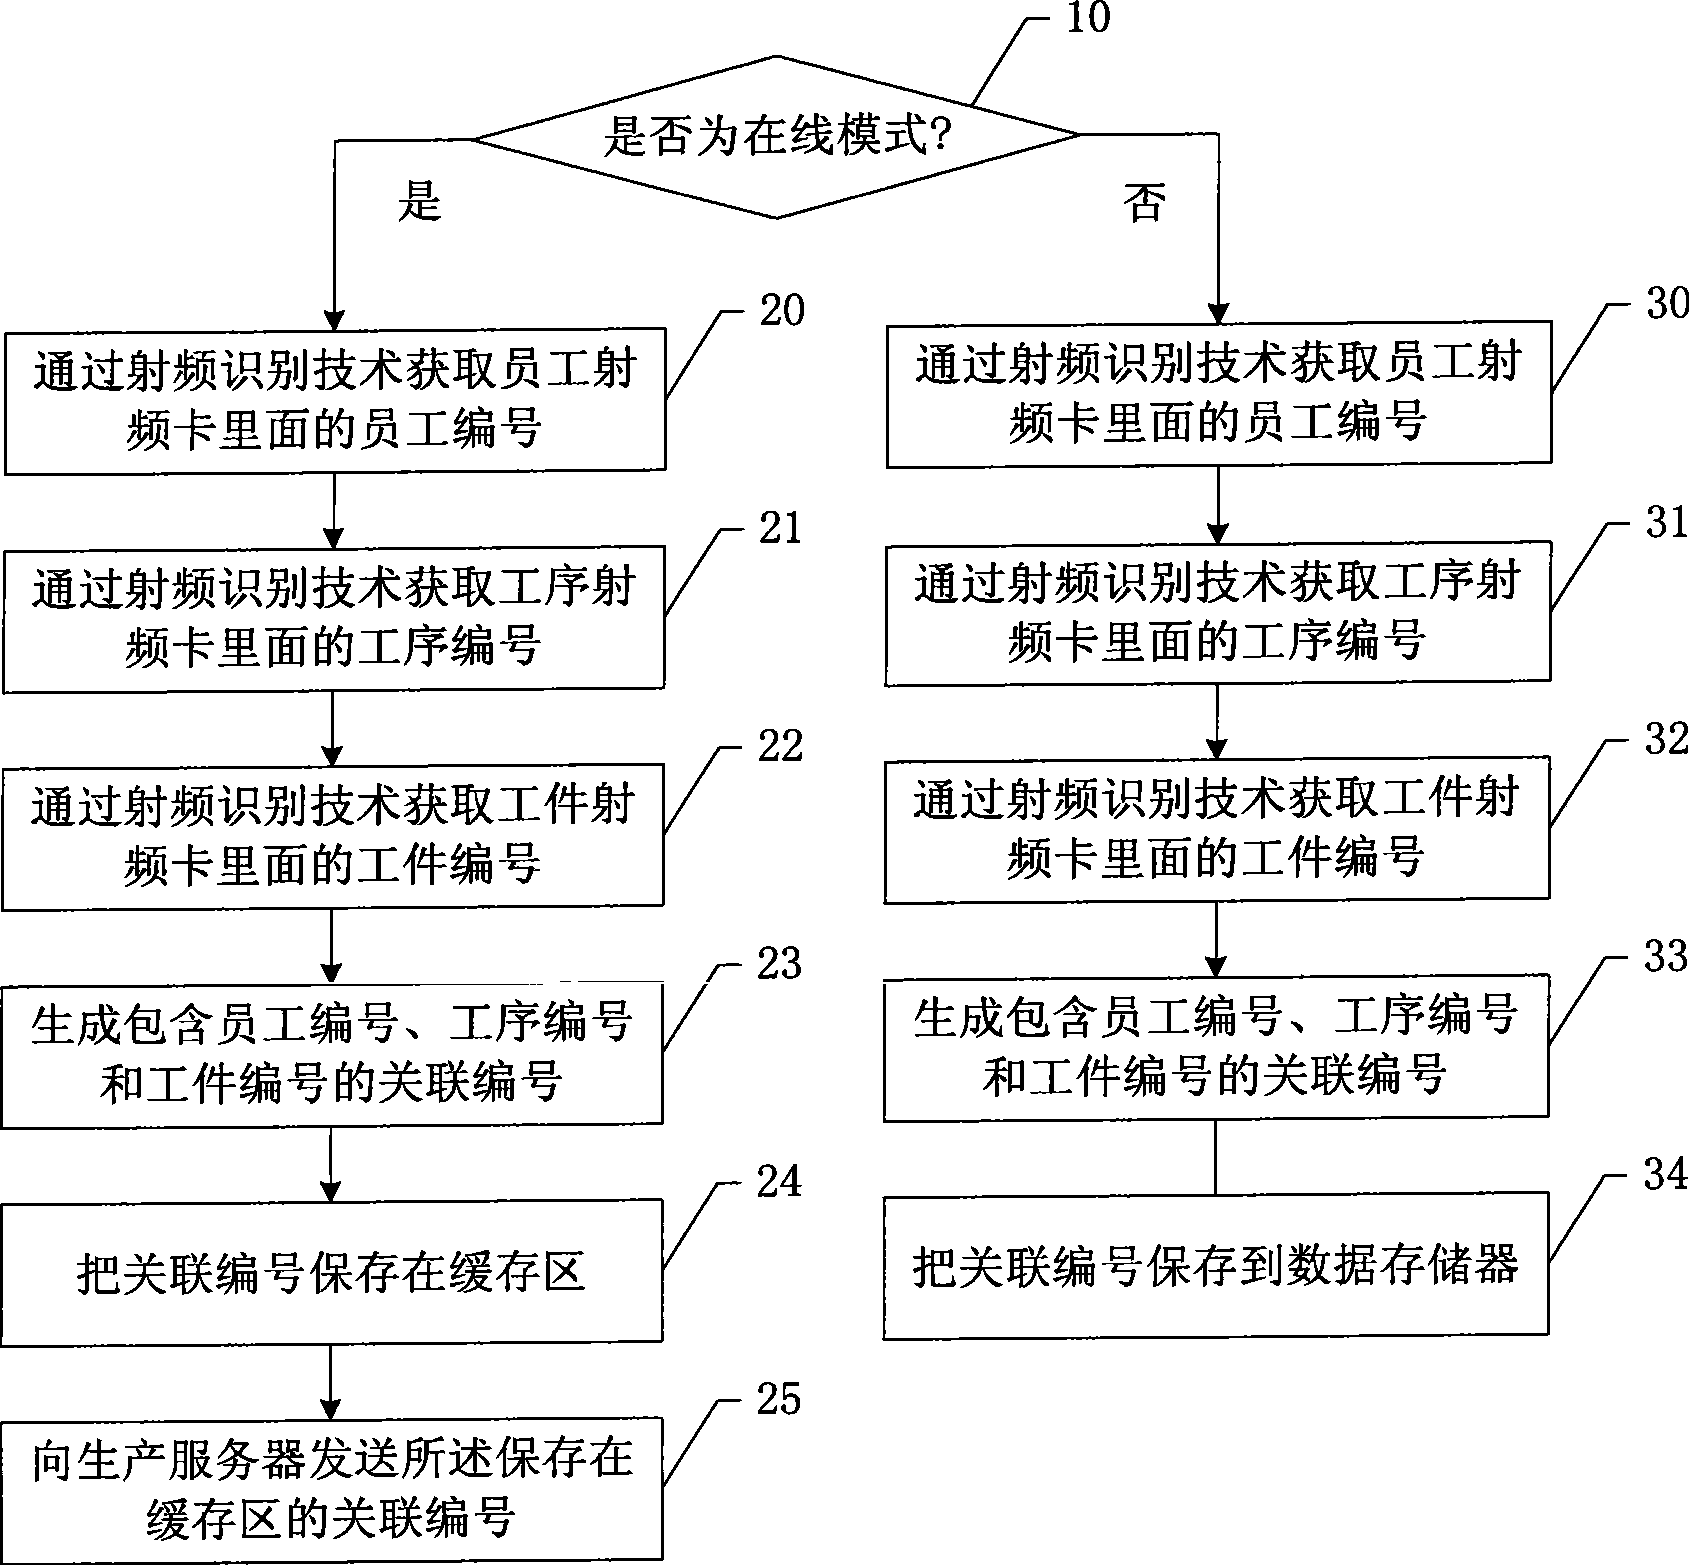 Production data processing method and data acquisition device